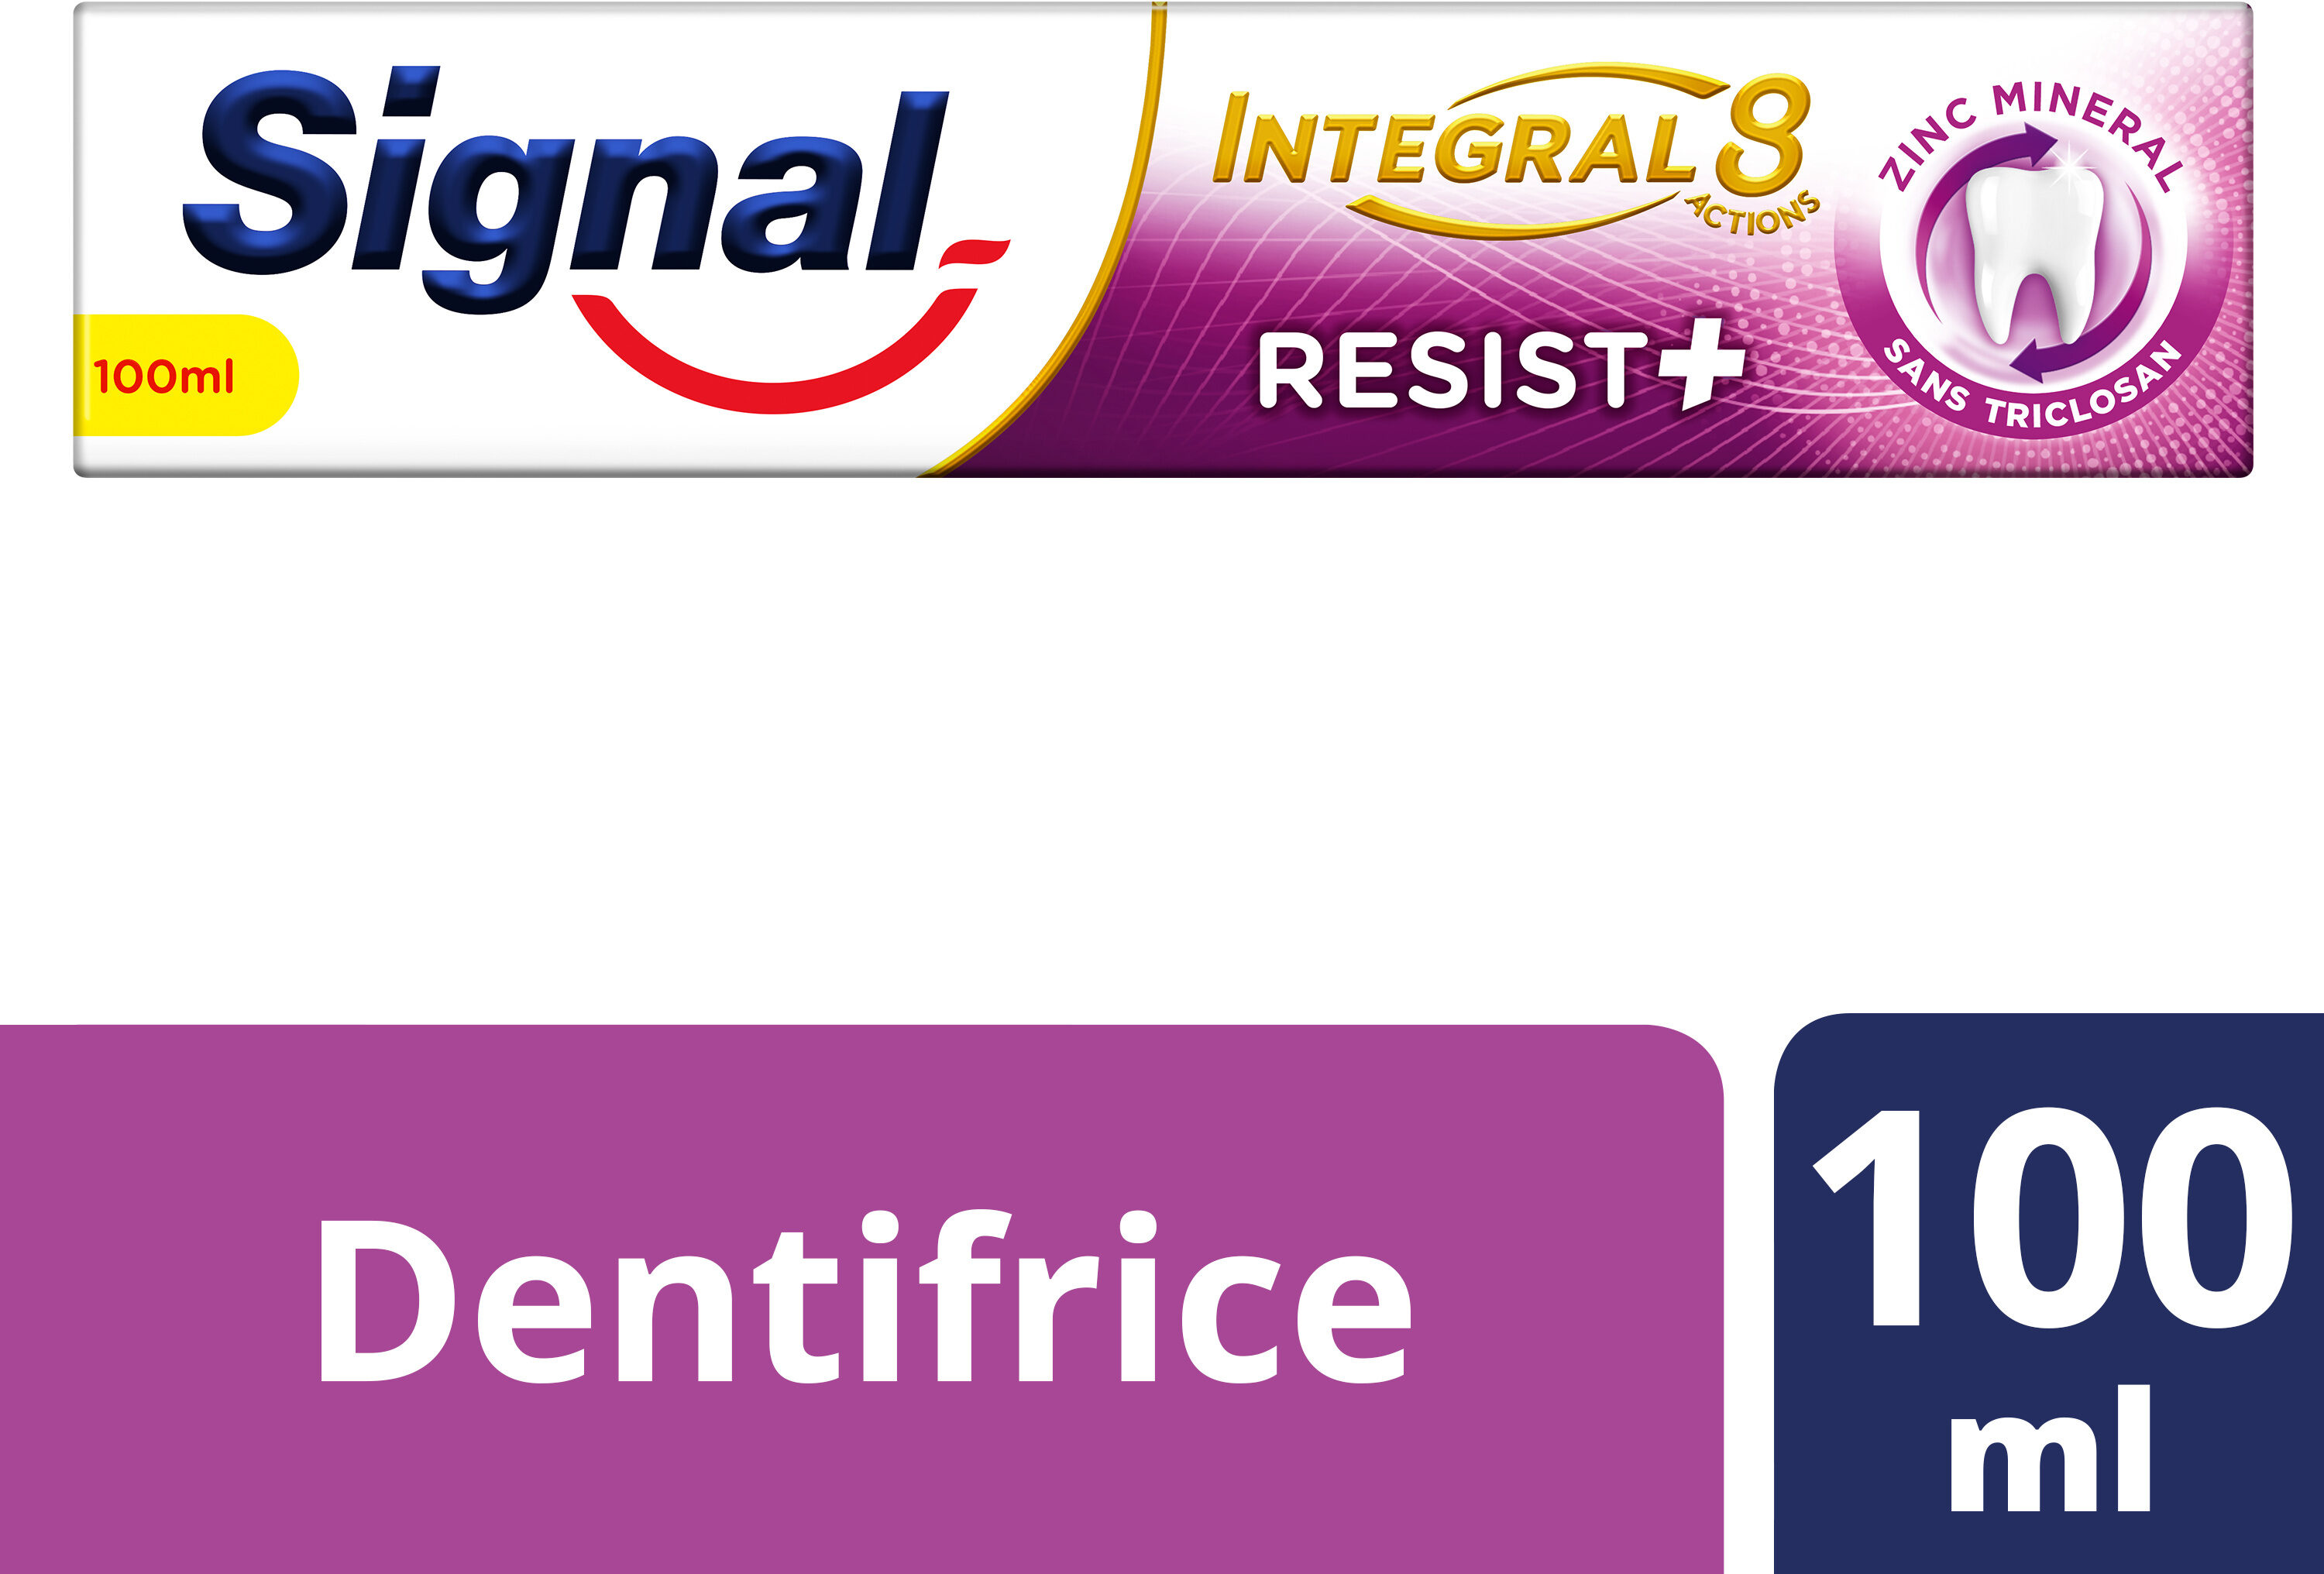 Signal Dentifrice Integral 8 Resist Plus - Product - fr